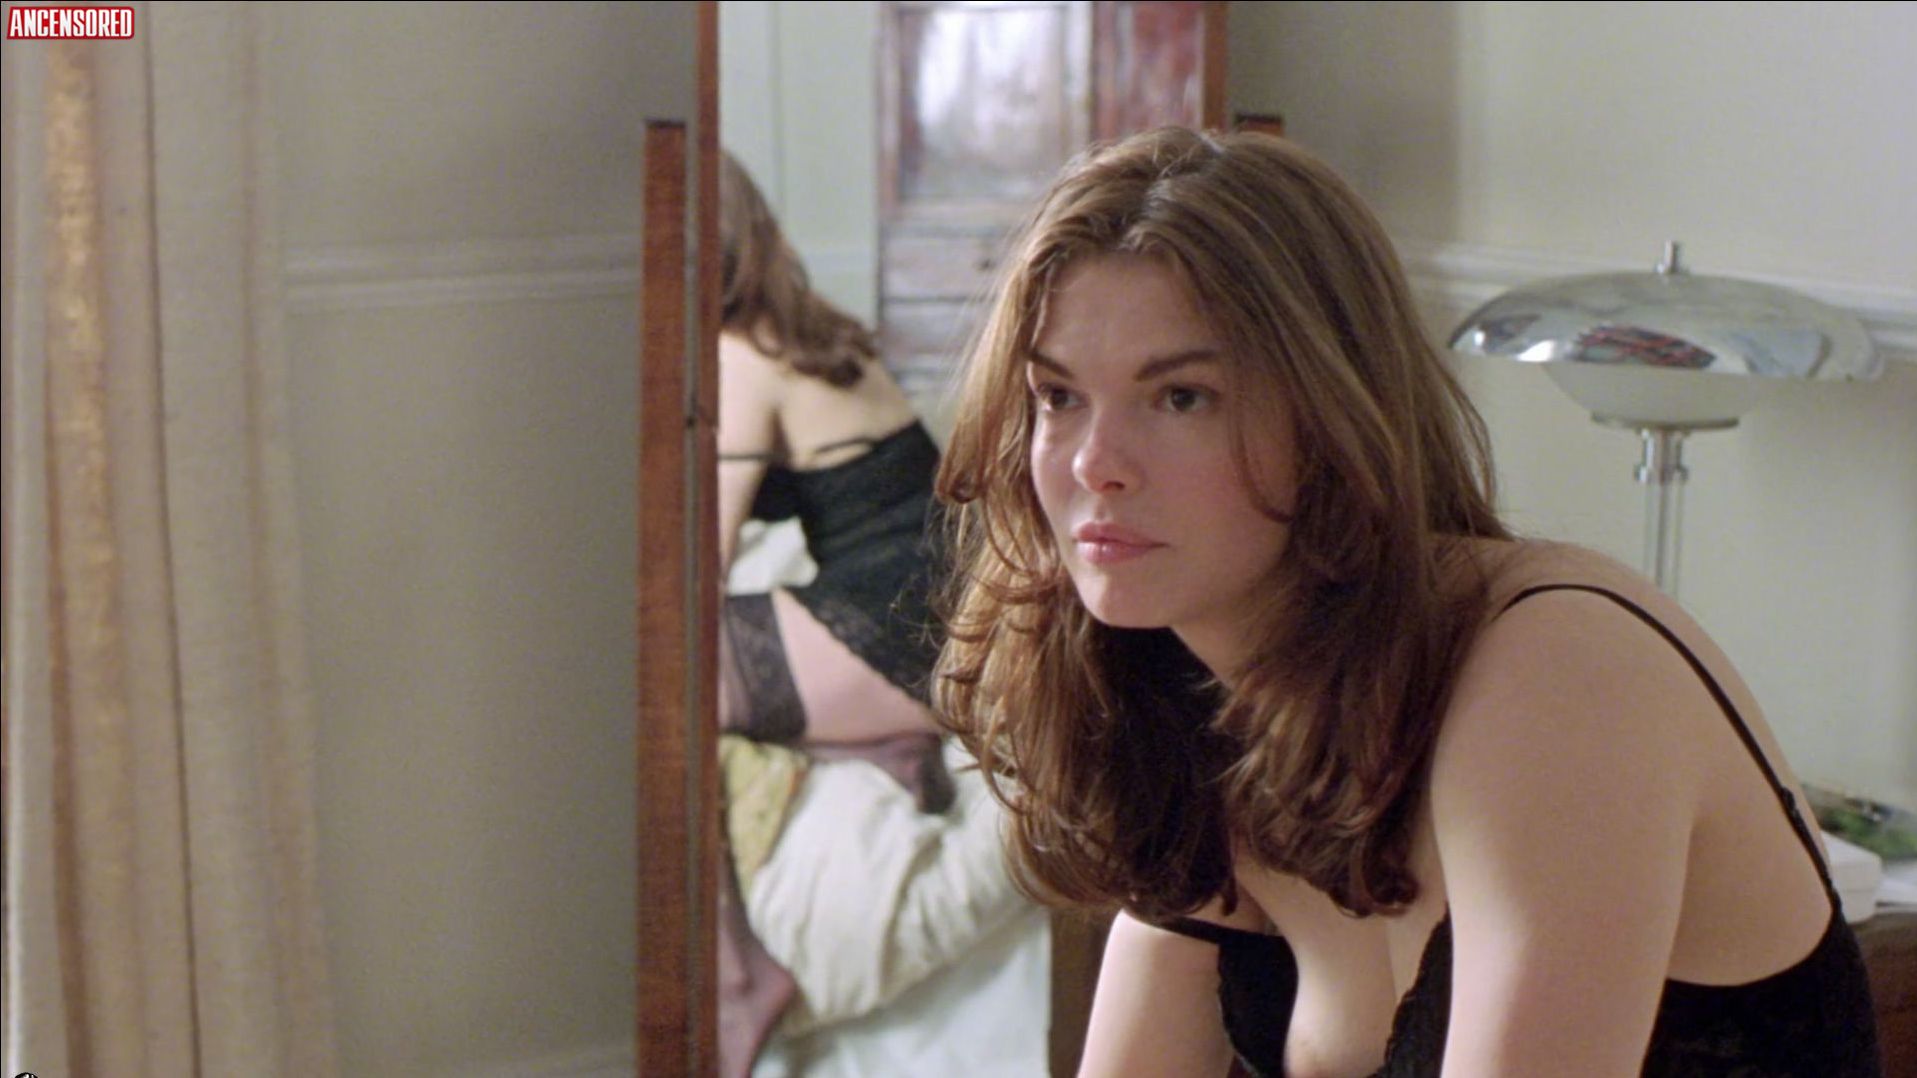 carolyn bridgewater recommends jeanne tripplehorn naked pic